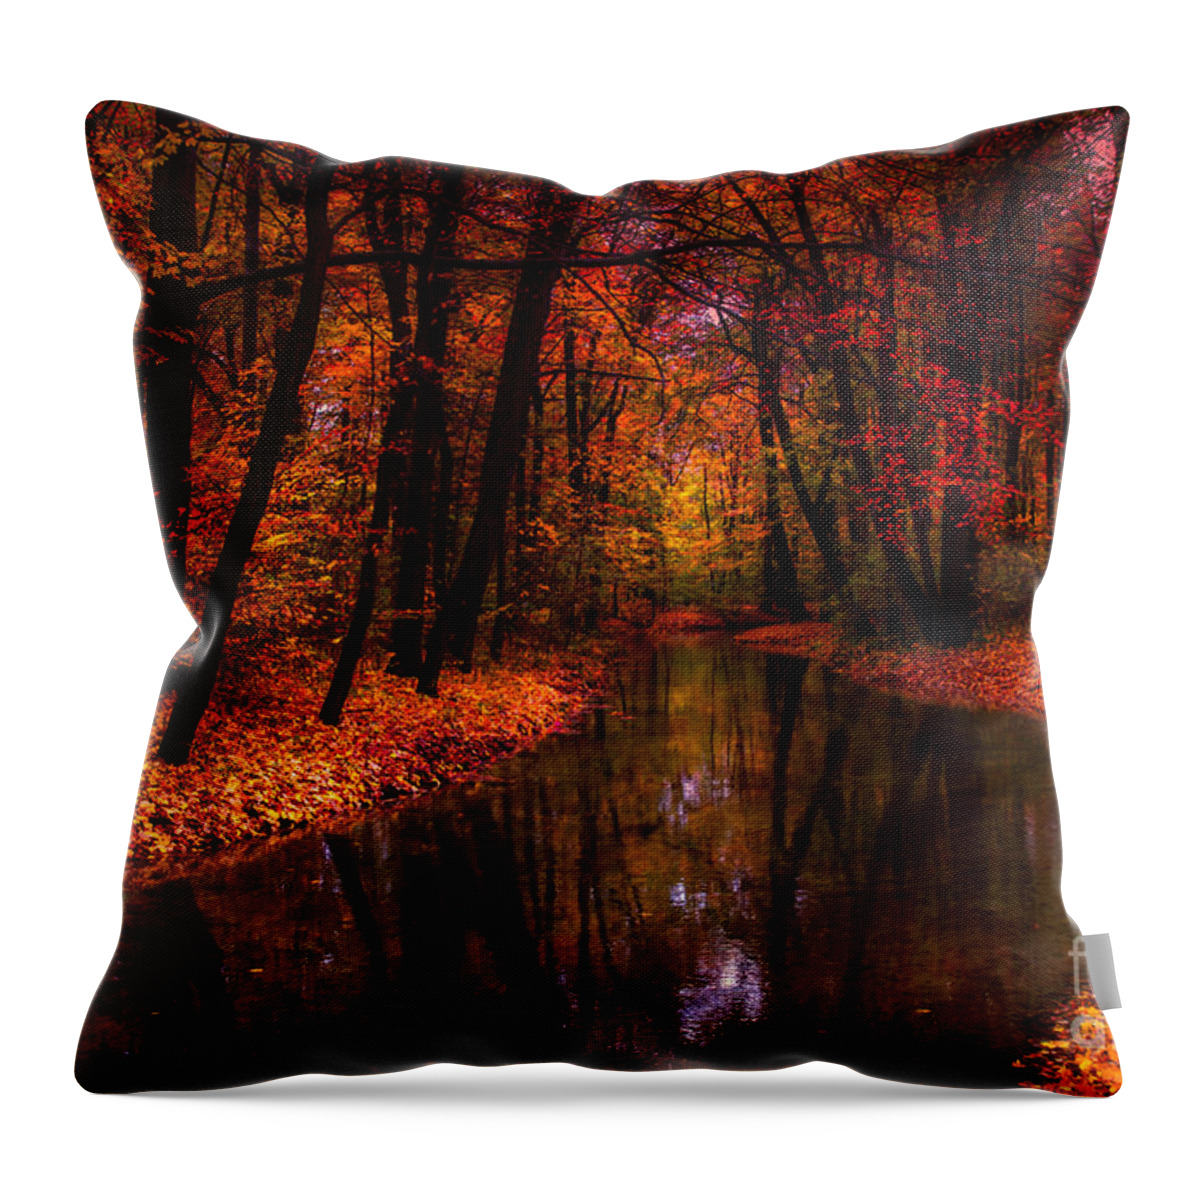 Autumn Throw Pillow featuring the photograph Flowing Through The Colors Of Fall by Hannes Cmarits